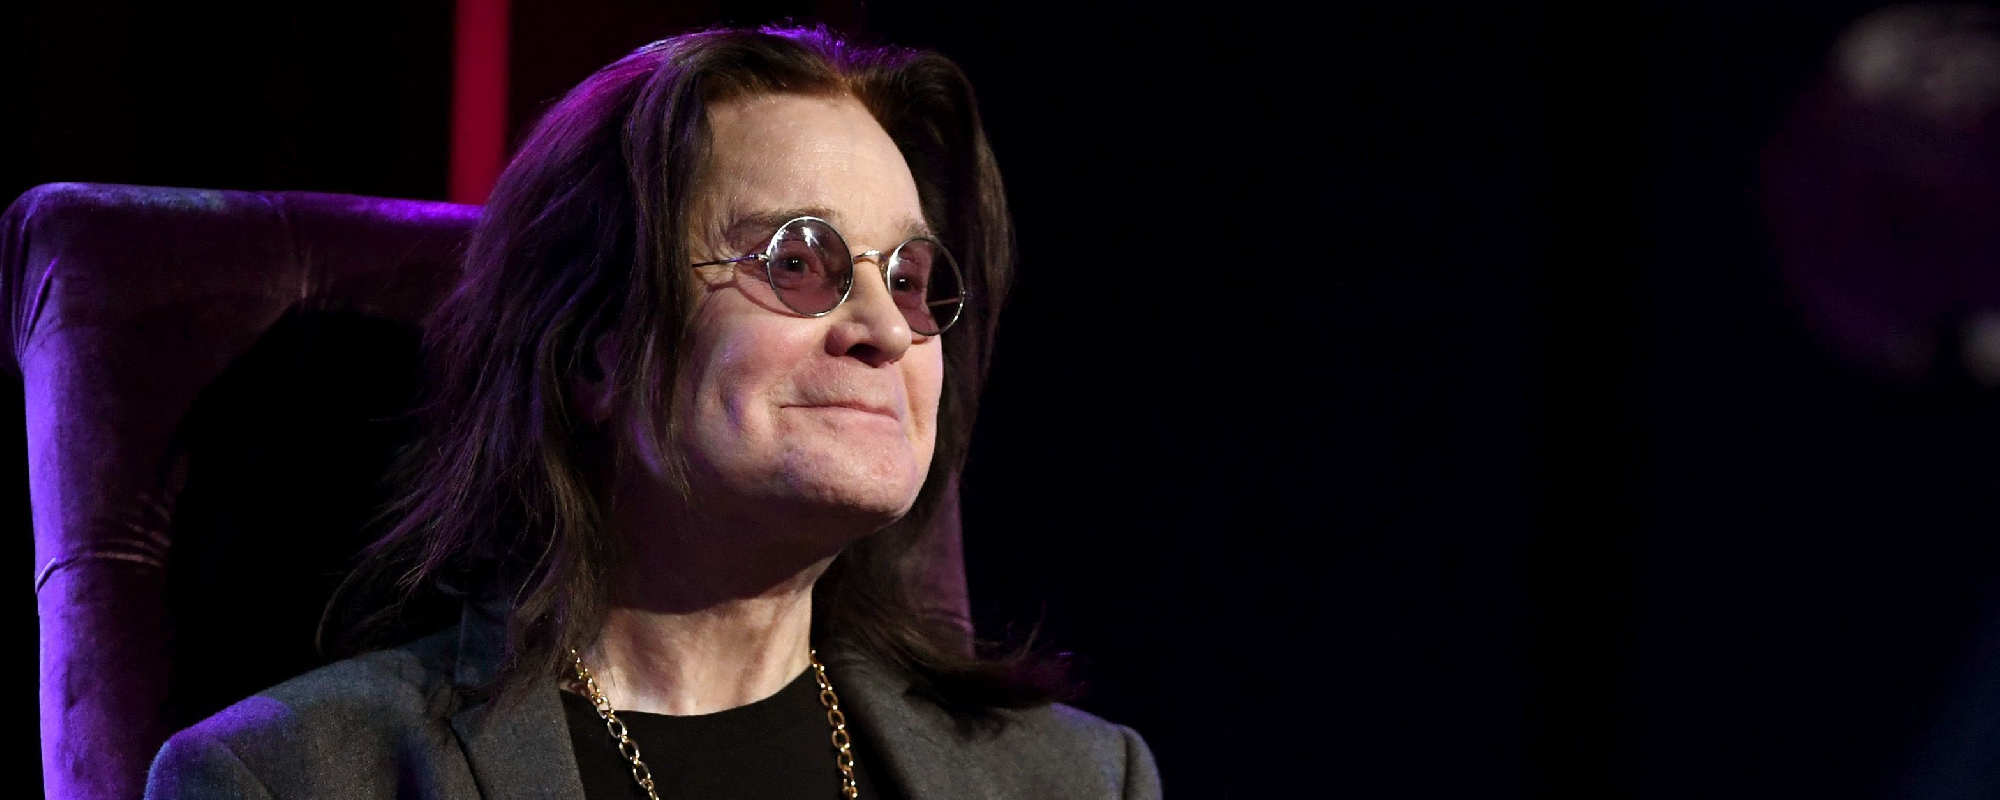 Ozzy Osbourne Updates Fans on Health and Performing at His Rock & Roll Hall of Fame Induction